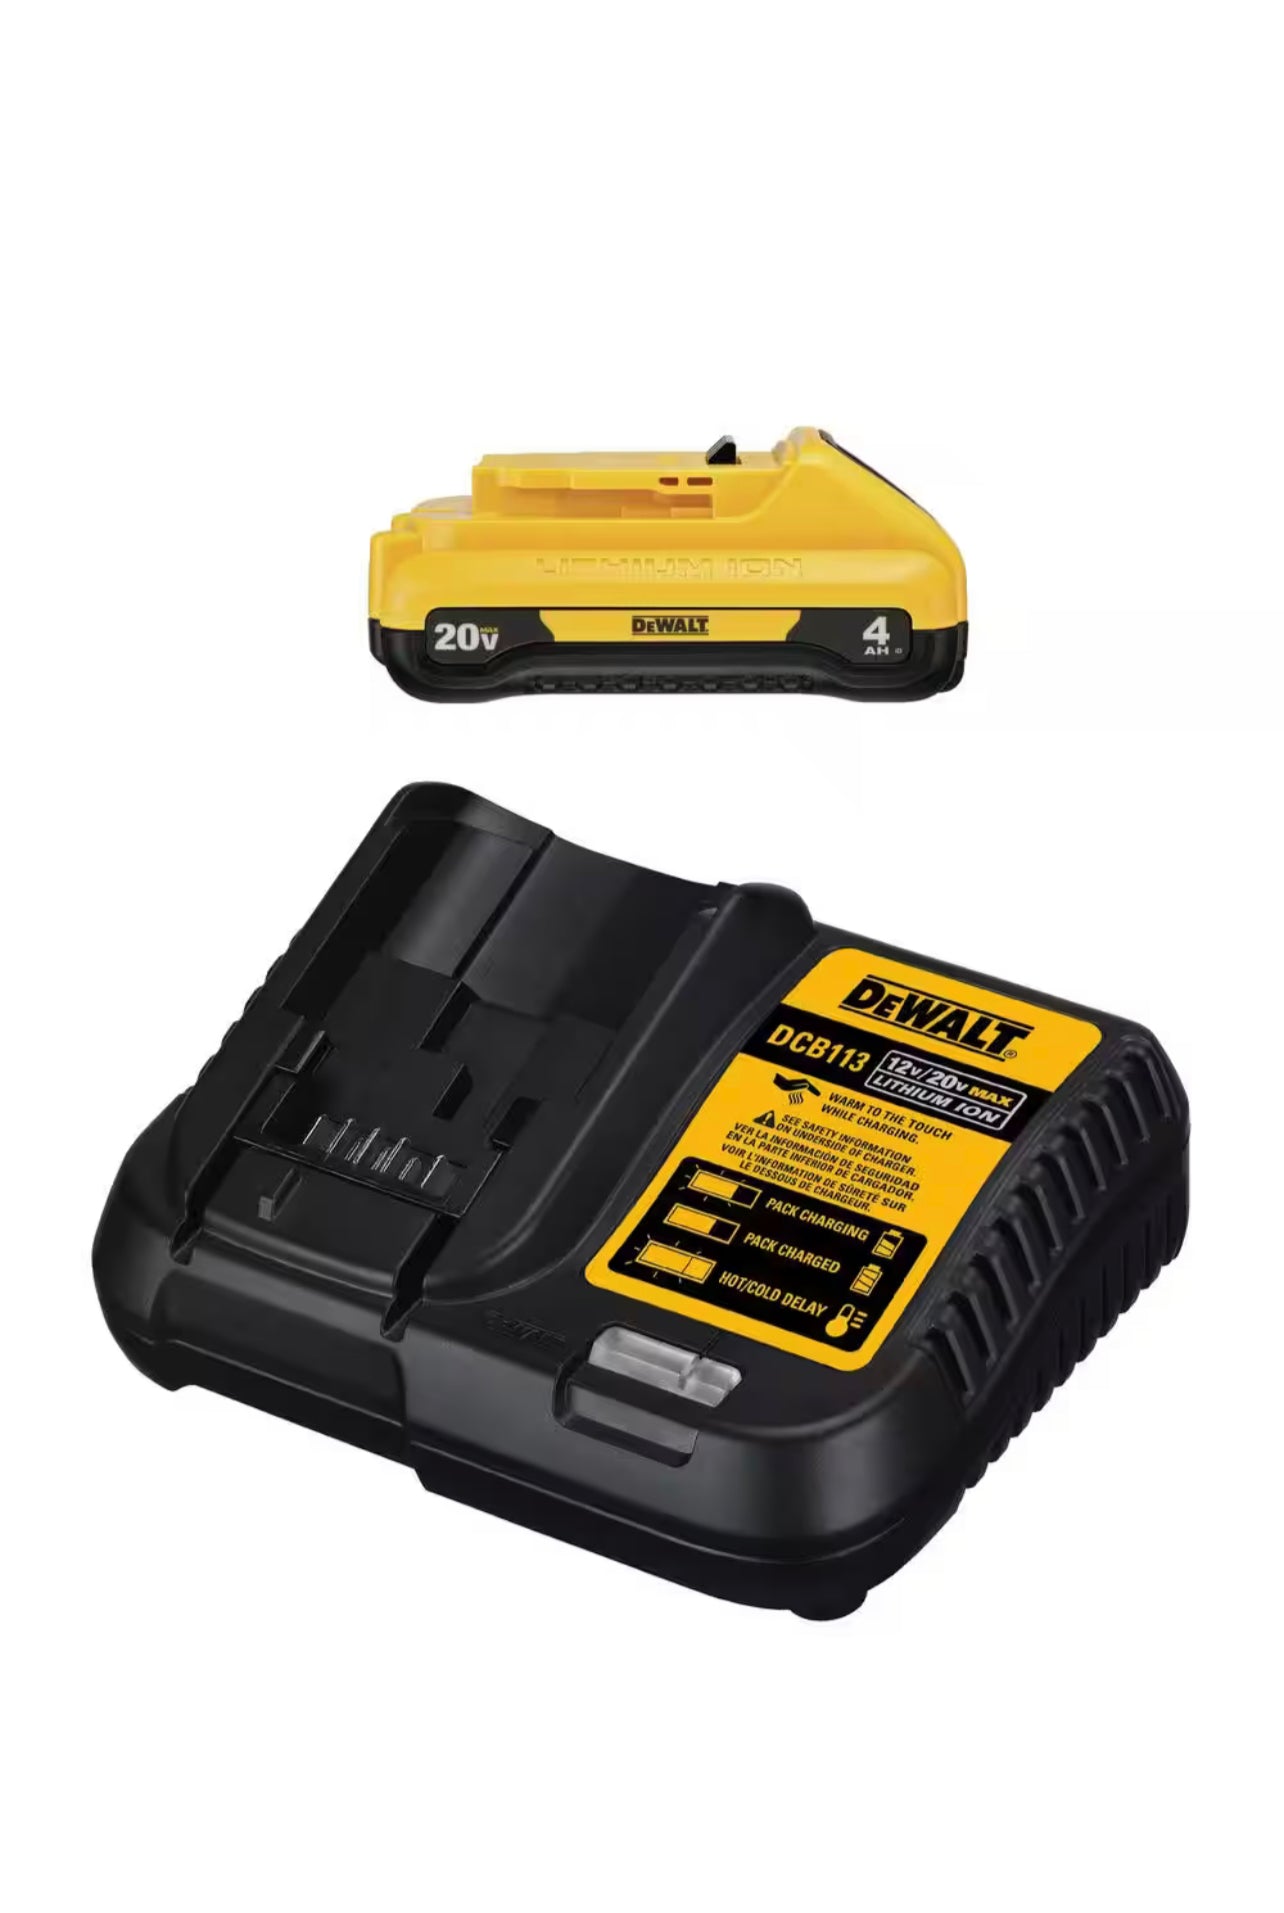 Dewalt 20V MAX Compact Lithium-Ion 4.0Ah Battery Pack with 12V to 20V MAX Charger Damaged Box